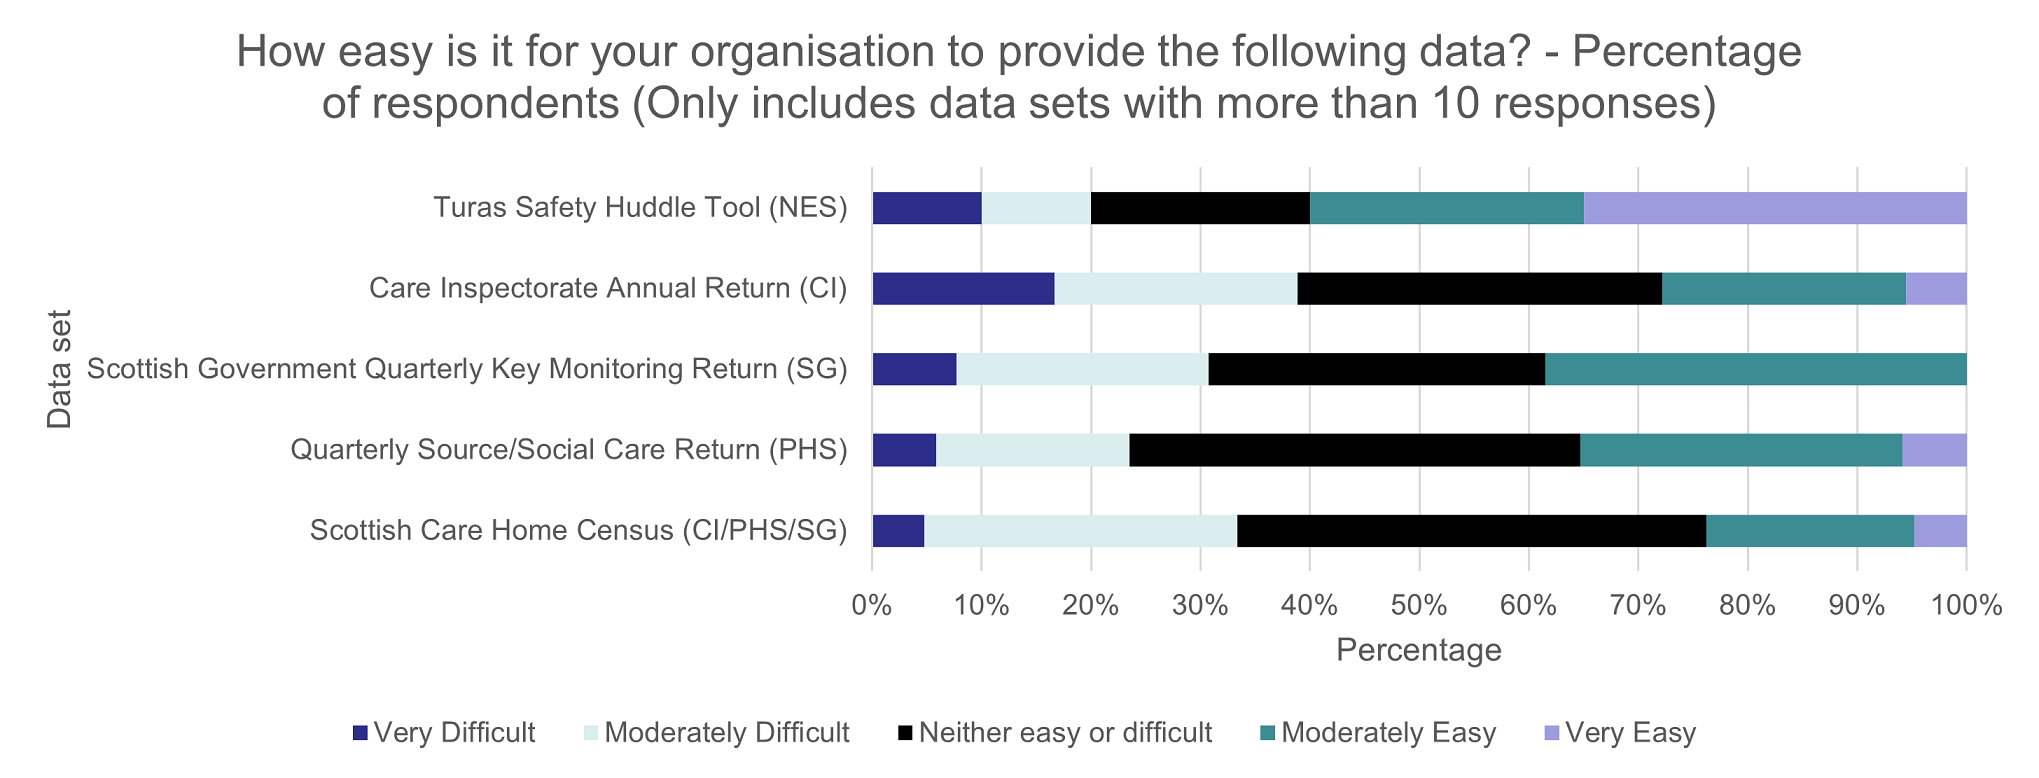 This chart shows respondents thoughts on how easy it was to provide data for the different data sets. Responses were collected from options of: Very difficult, Moderately Difficult, Neither easy or difficult, Moderately Easy and Very Easy. The chart only includes publications with more than 10 responses.